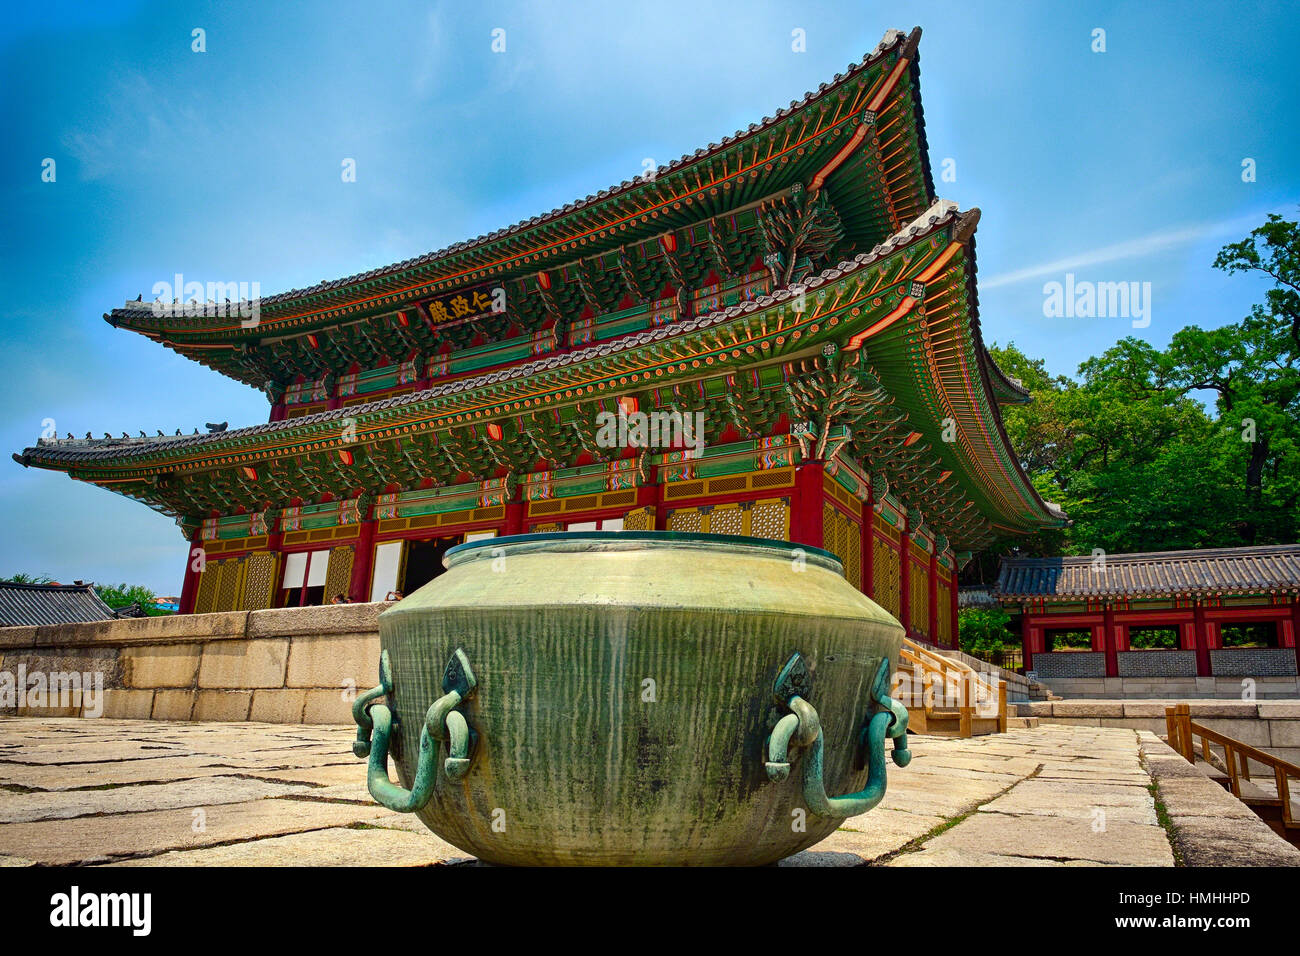 Low Angle View of the Geunjeongjeon Hall (Throne Hall) with an Incense Kettle in the Foreground, Gyeongbokgung Palace, Seoul, South Korea Stock Photo